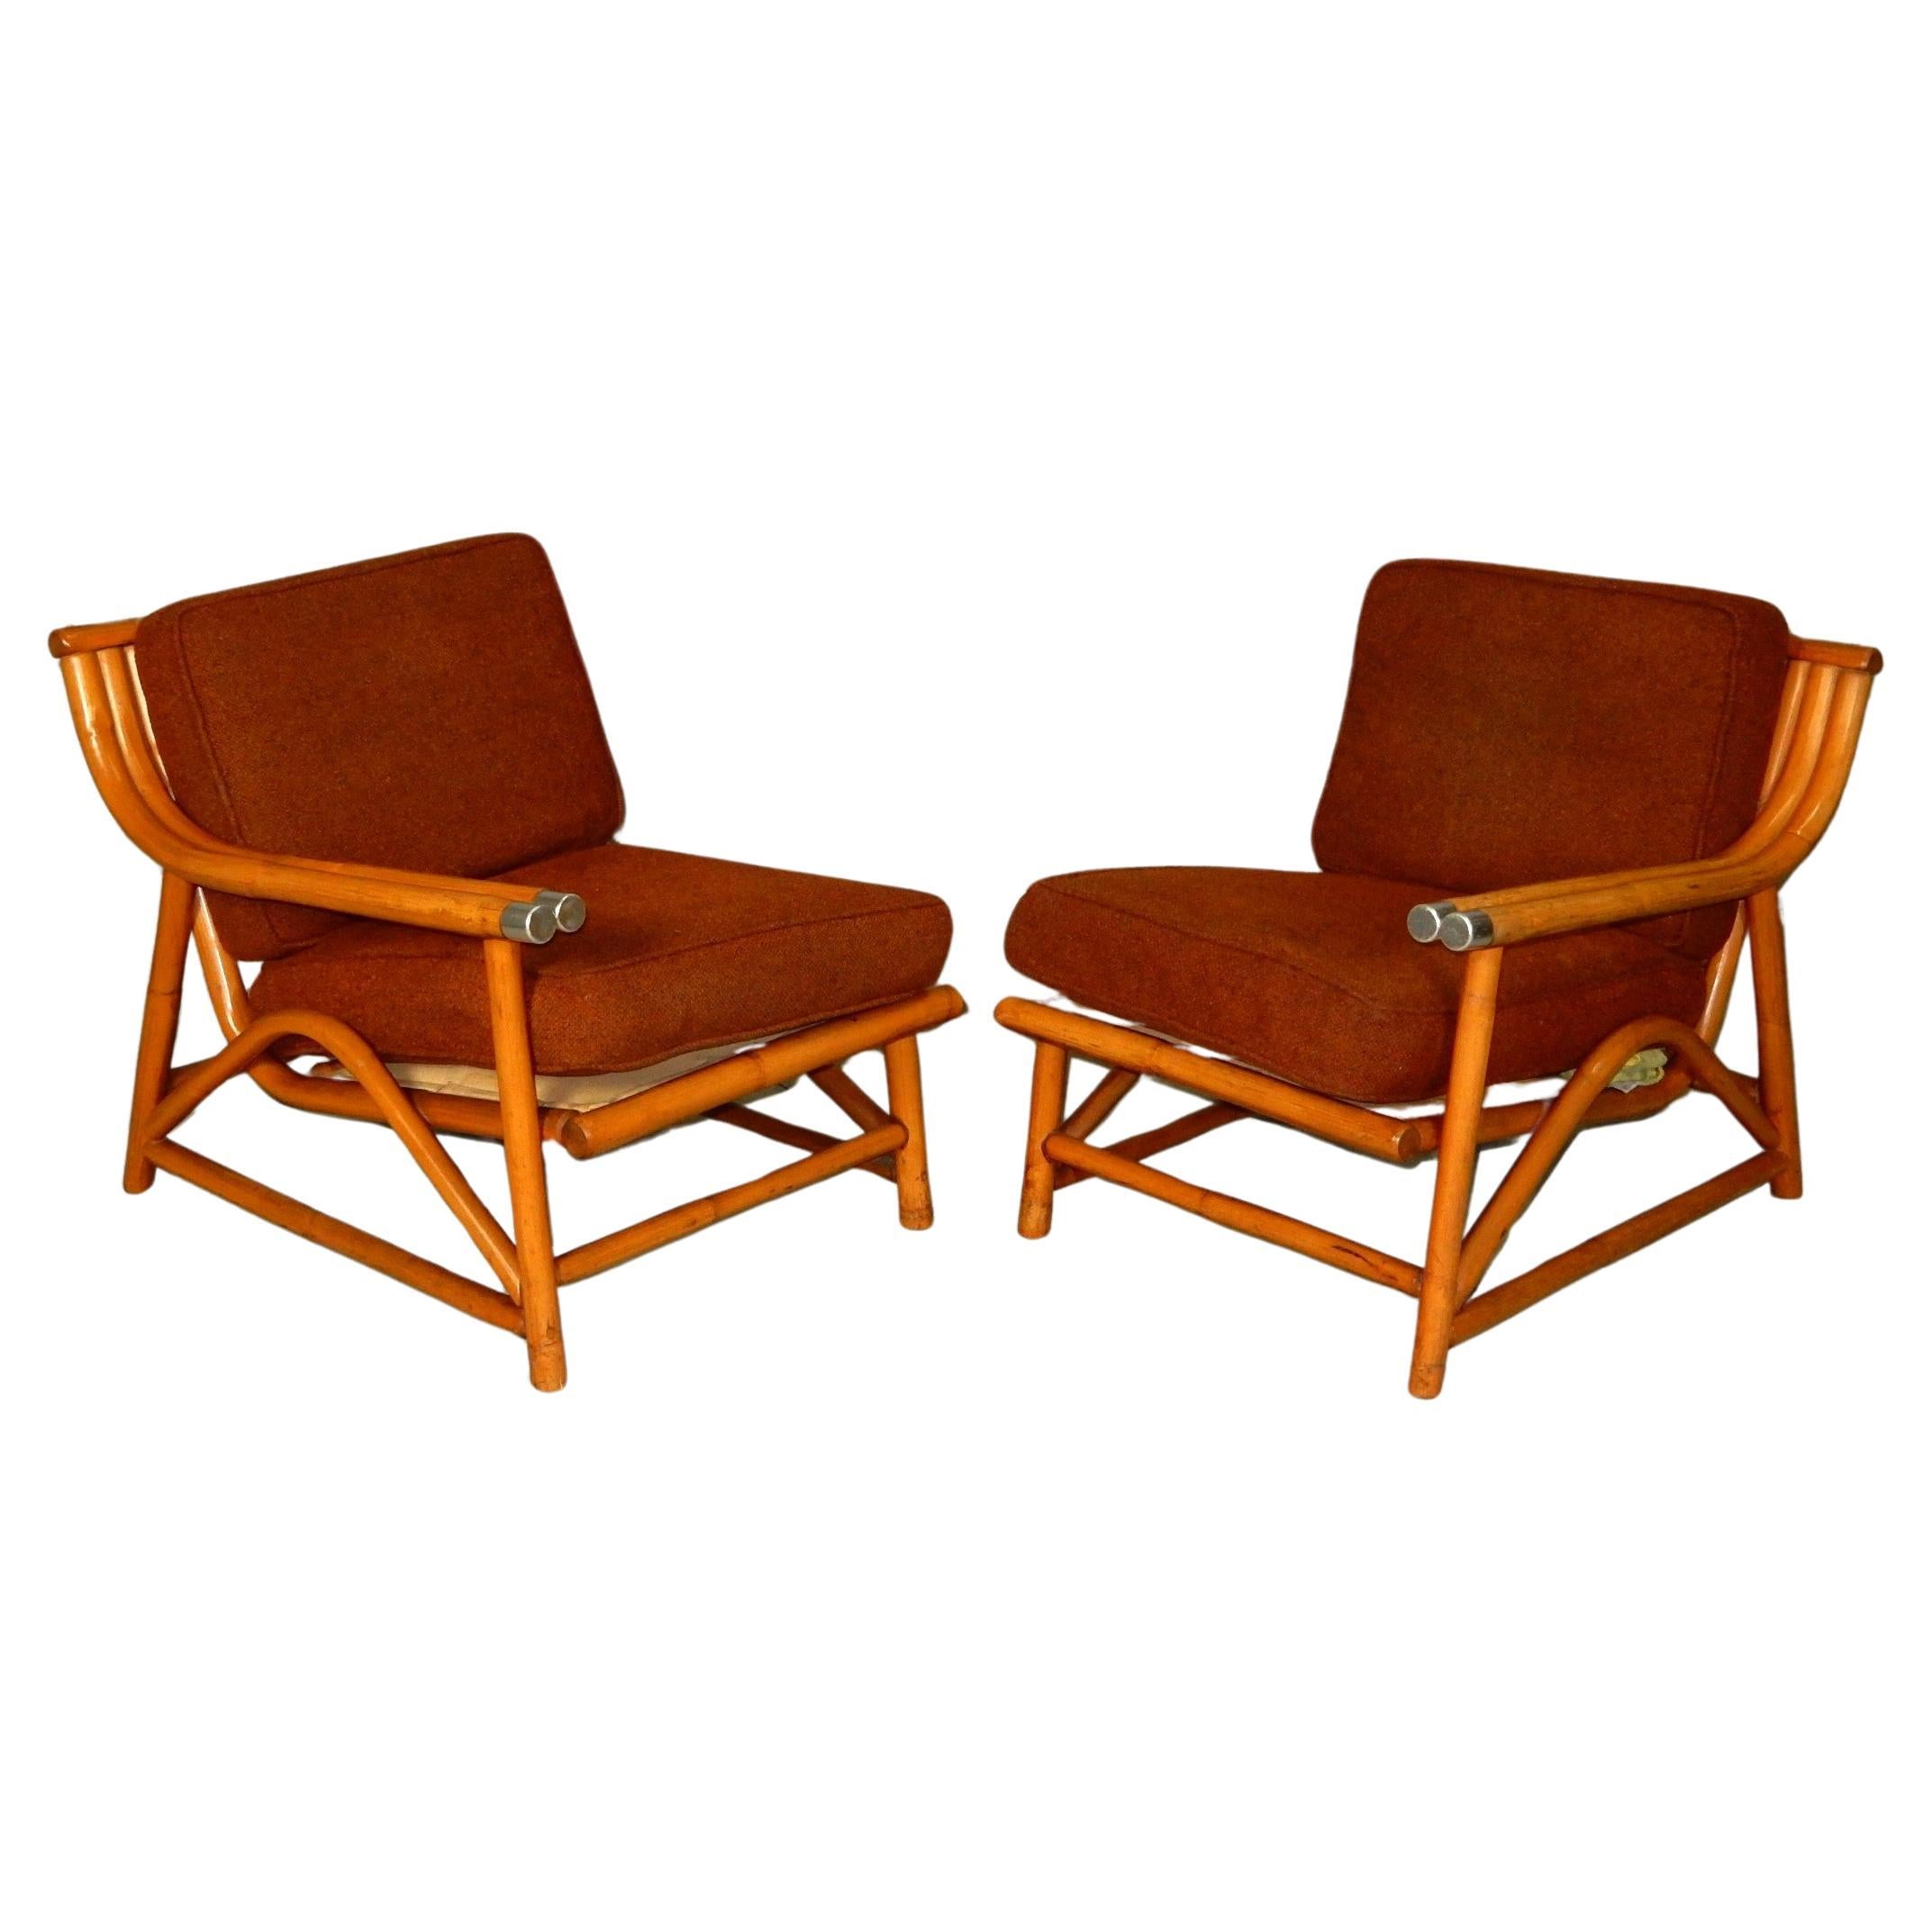 1950's Ficks Reed Rattan Split Settee or Lounge Chairs  For Sale